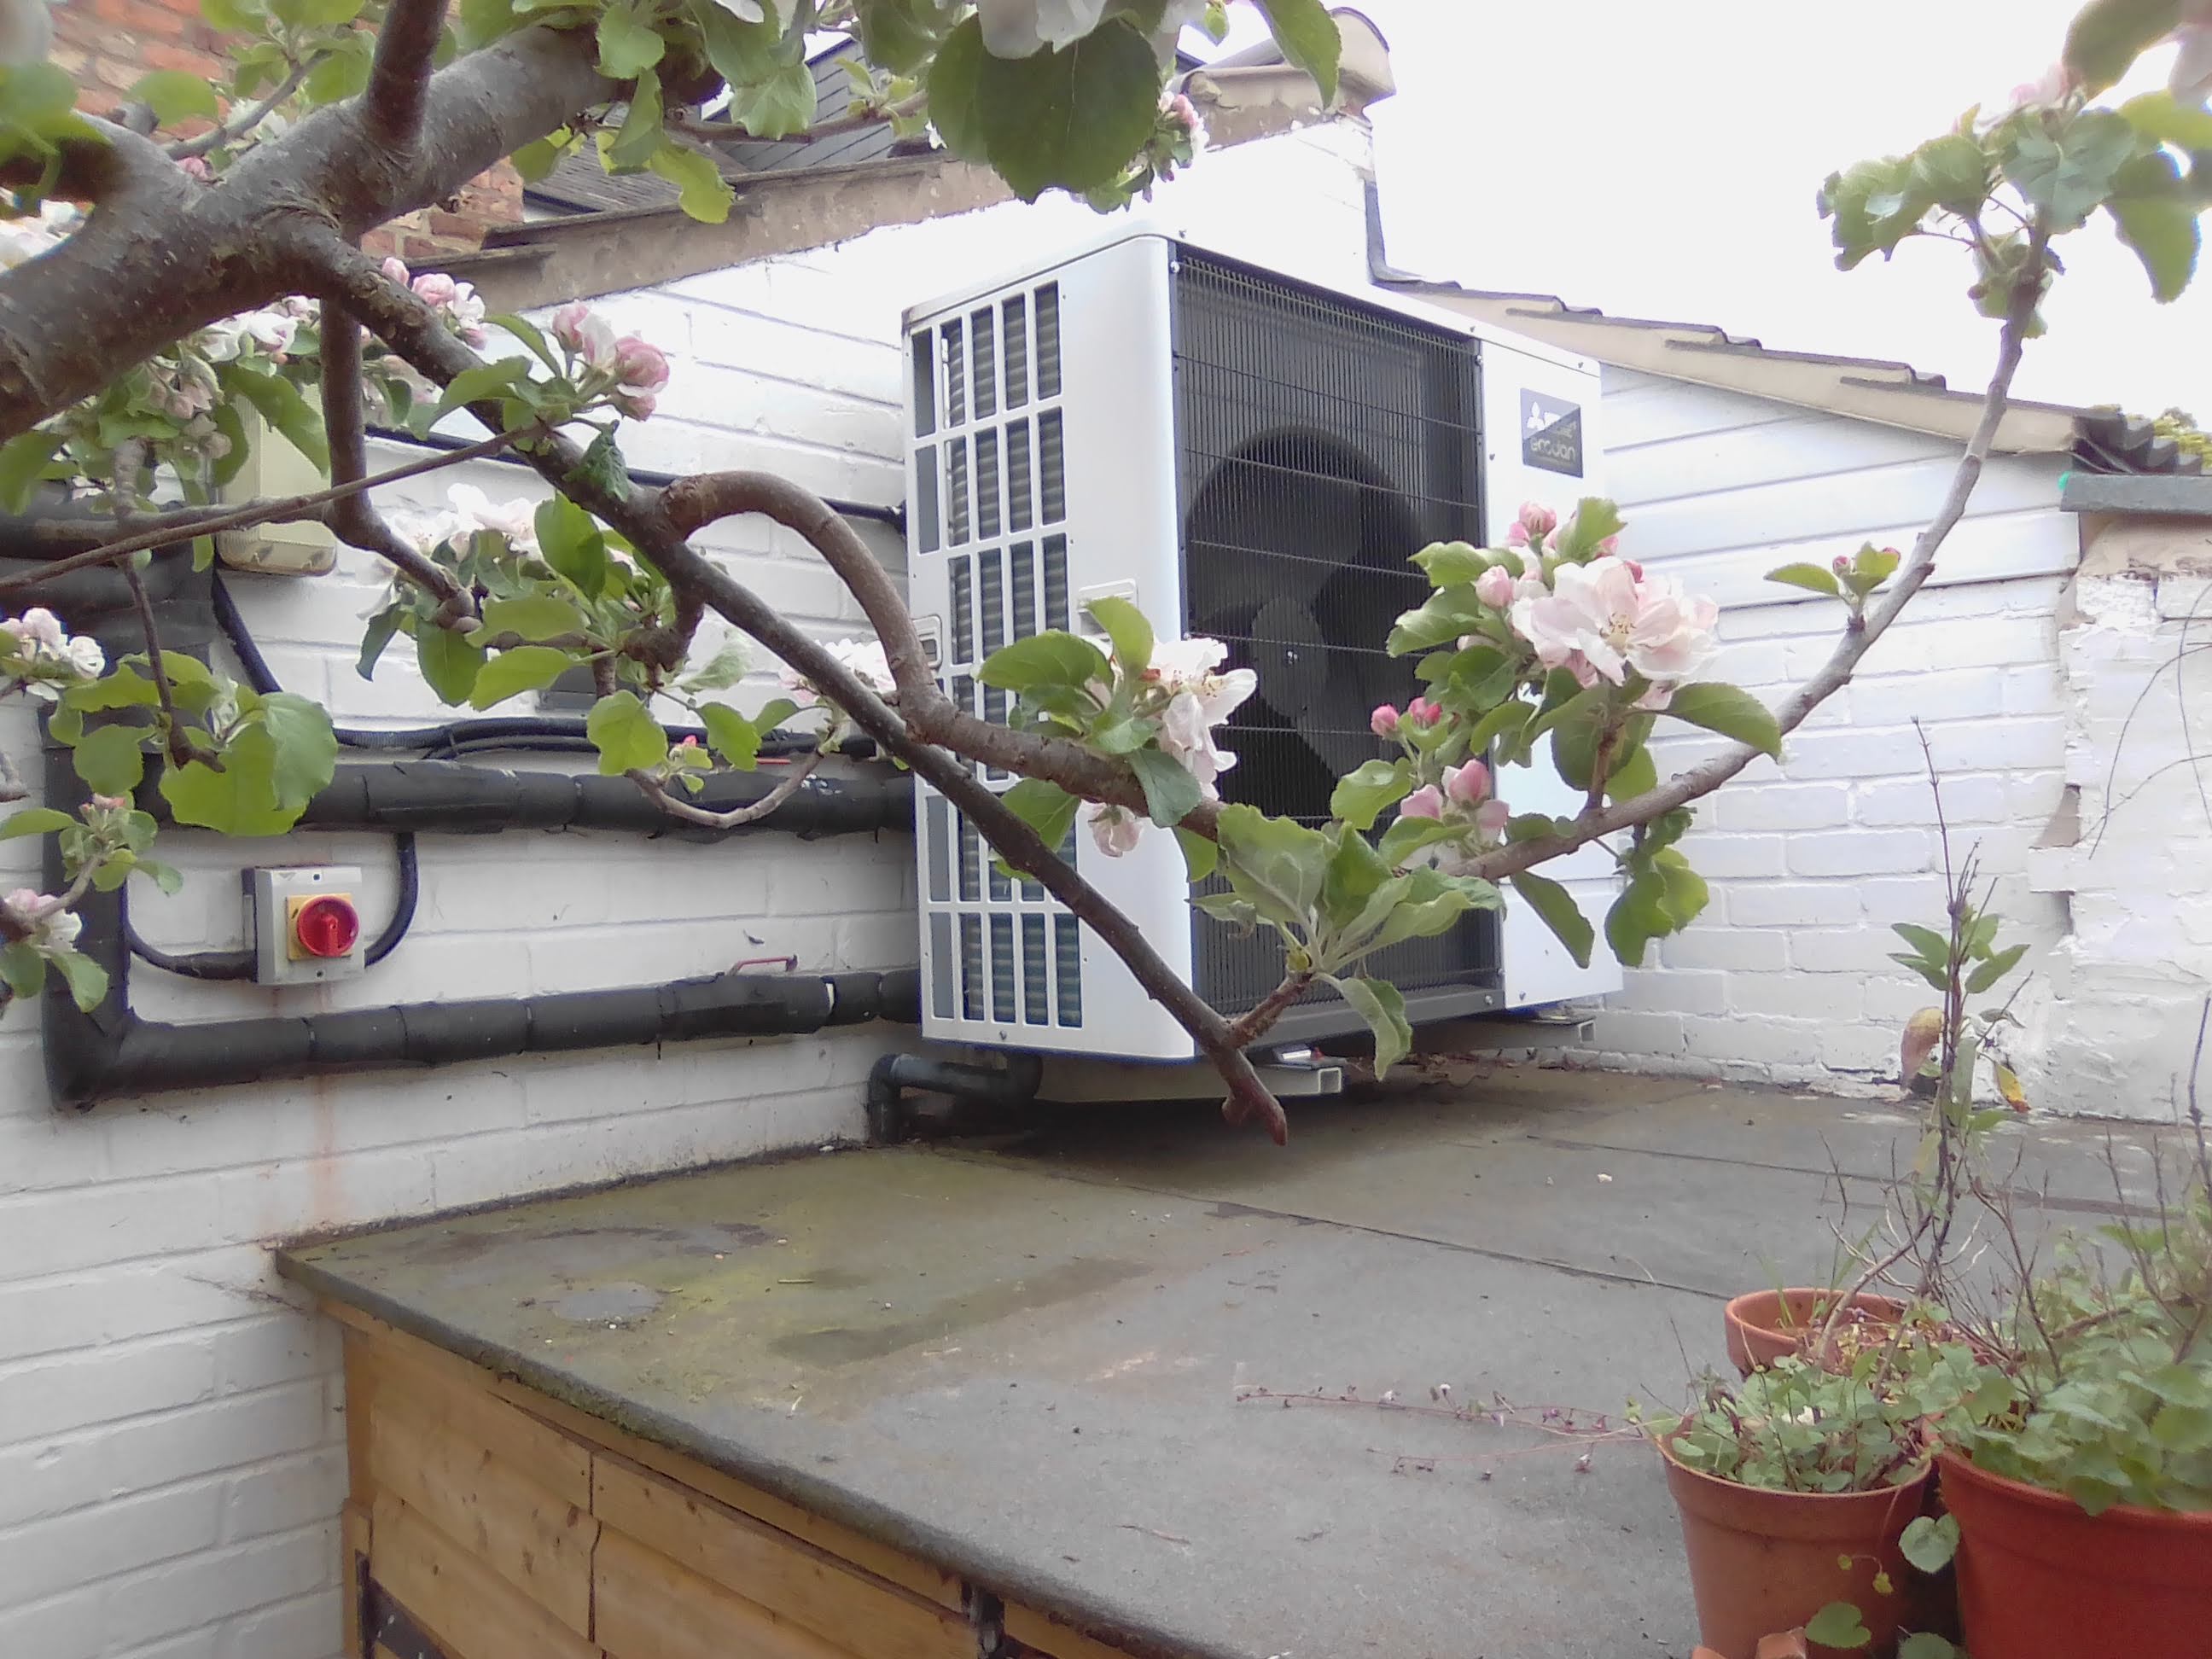 Photo of heat pump on external wall of a house with blossom in the foreground.